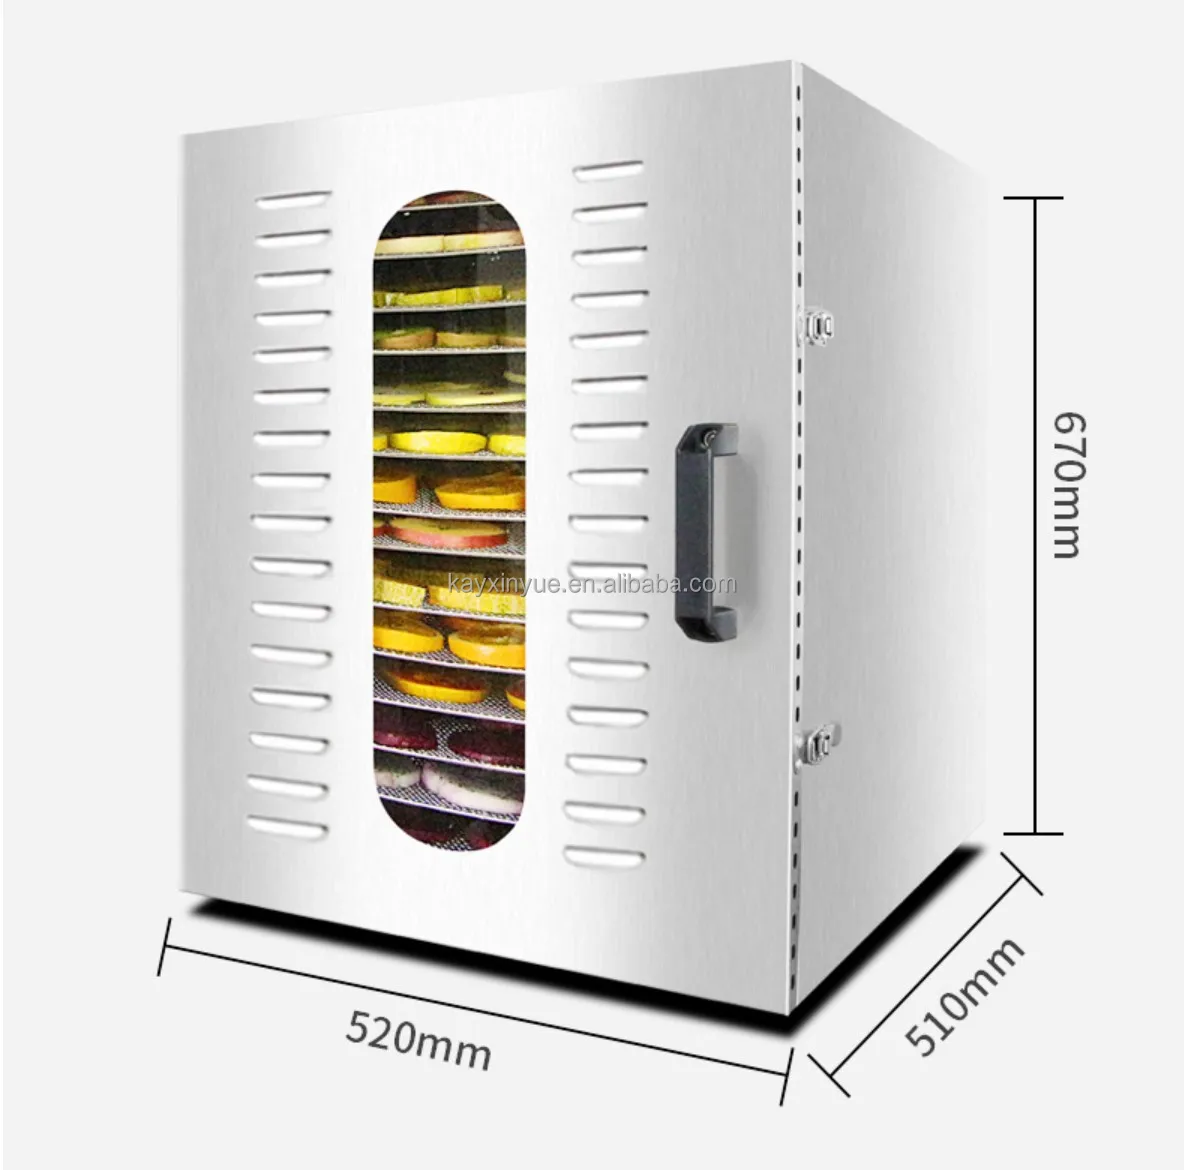 16 Layer Stainless Steel Carbohydrates Food Dehydrator For Fruits